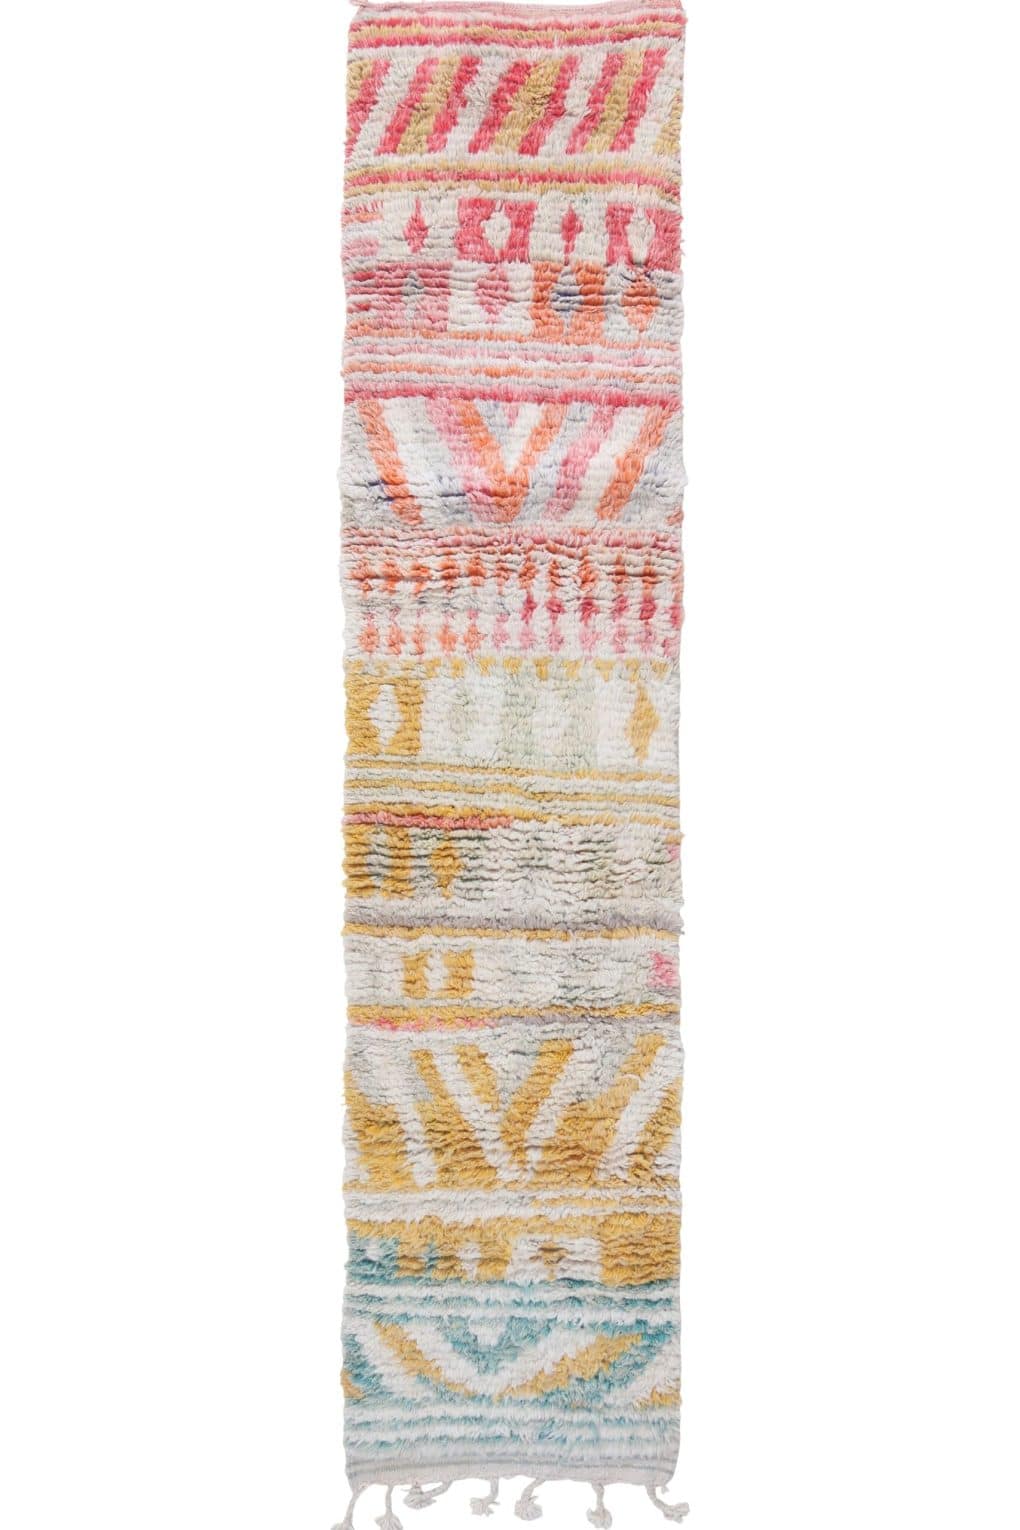 Moroccan-inspired abstract runner rug with vibrant colors and intricate geometric patterns.